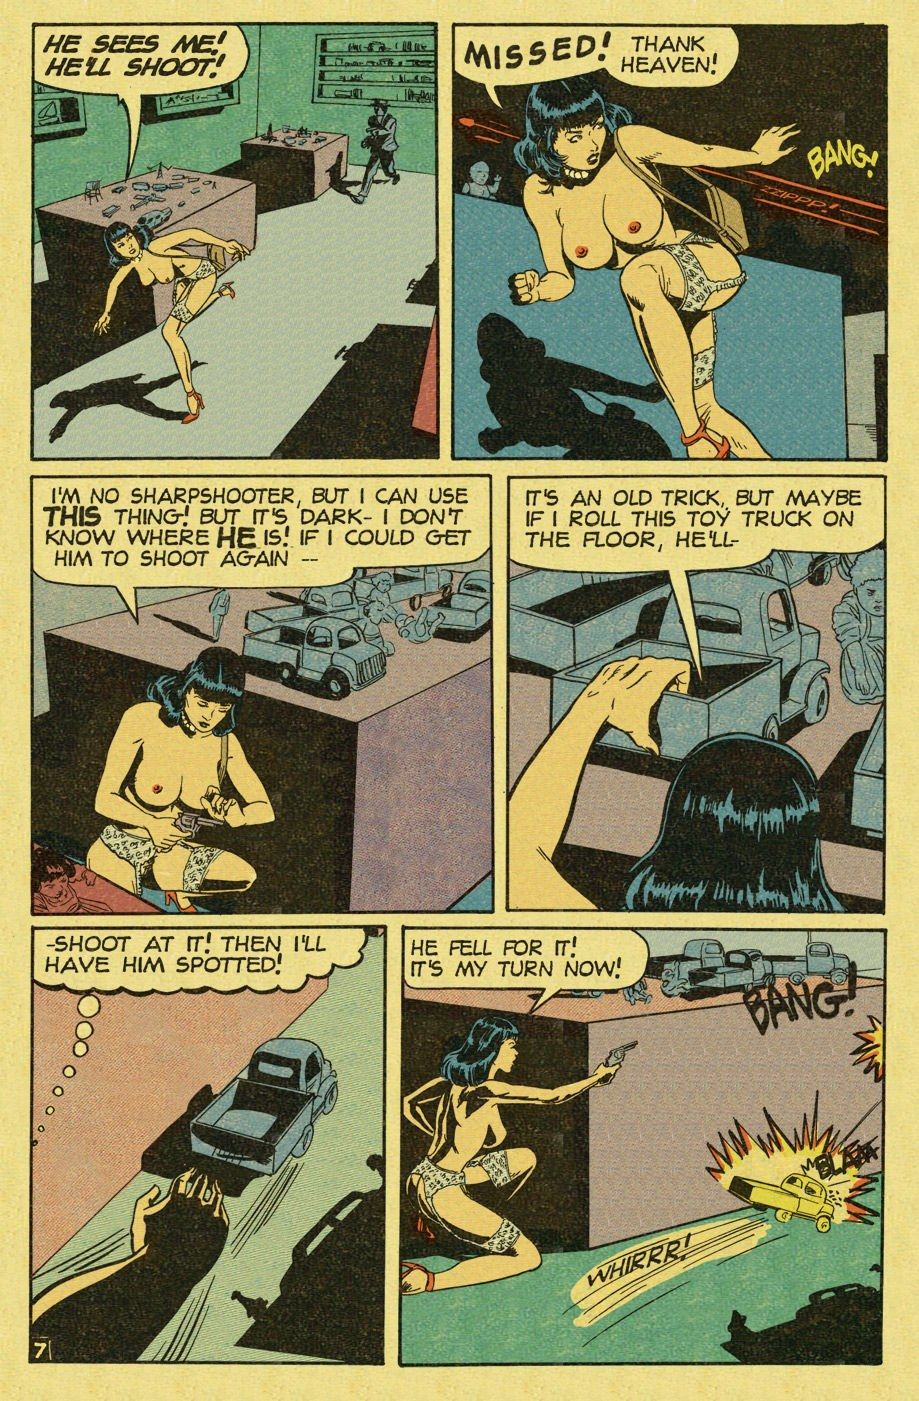 Crime Smashers Part 1 The Wertham Files page 41